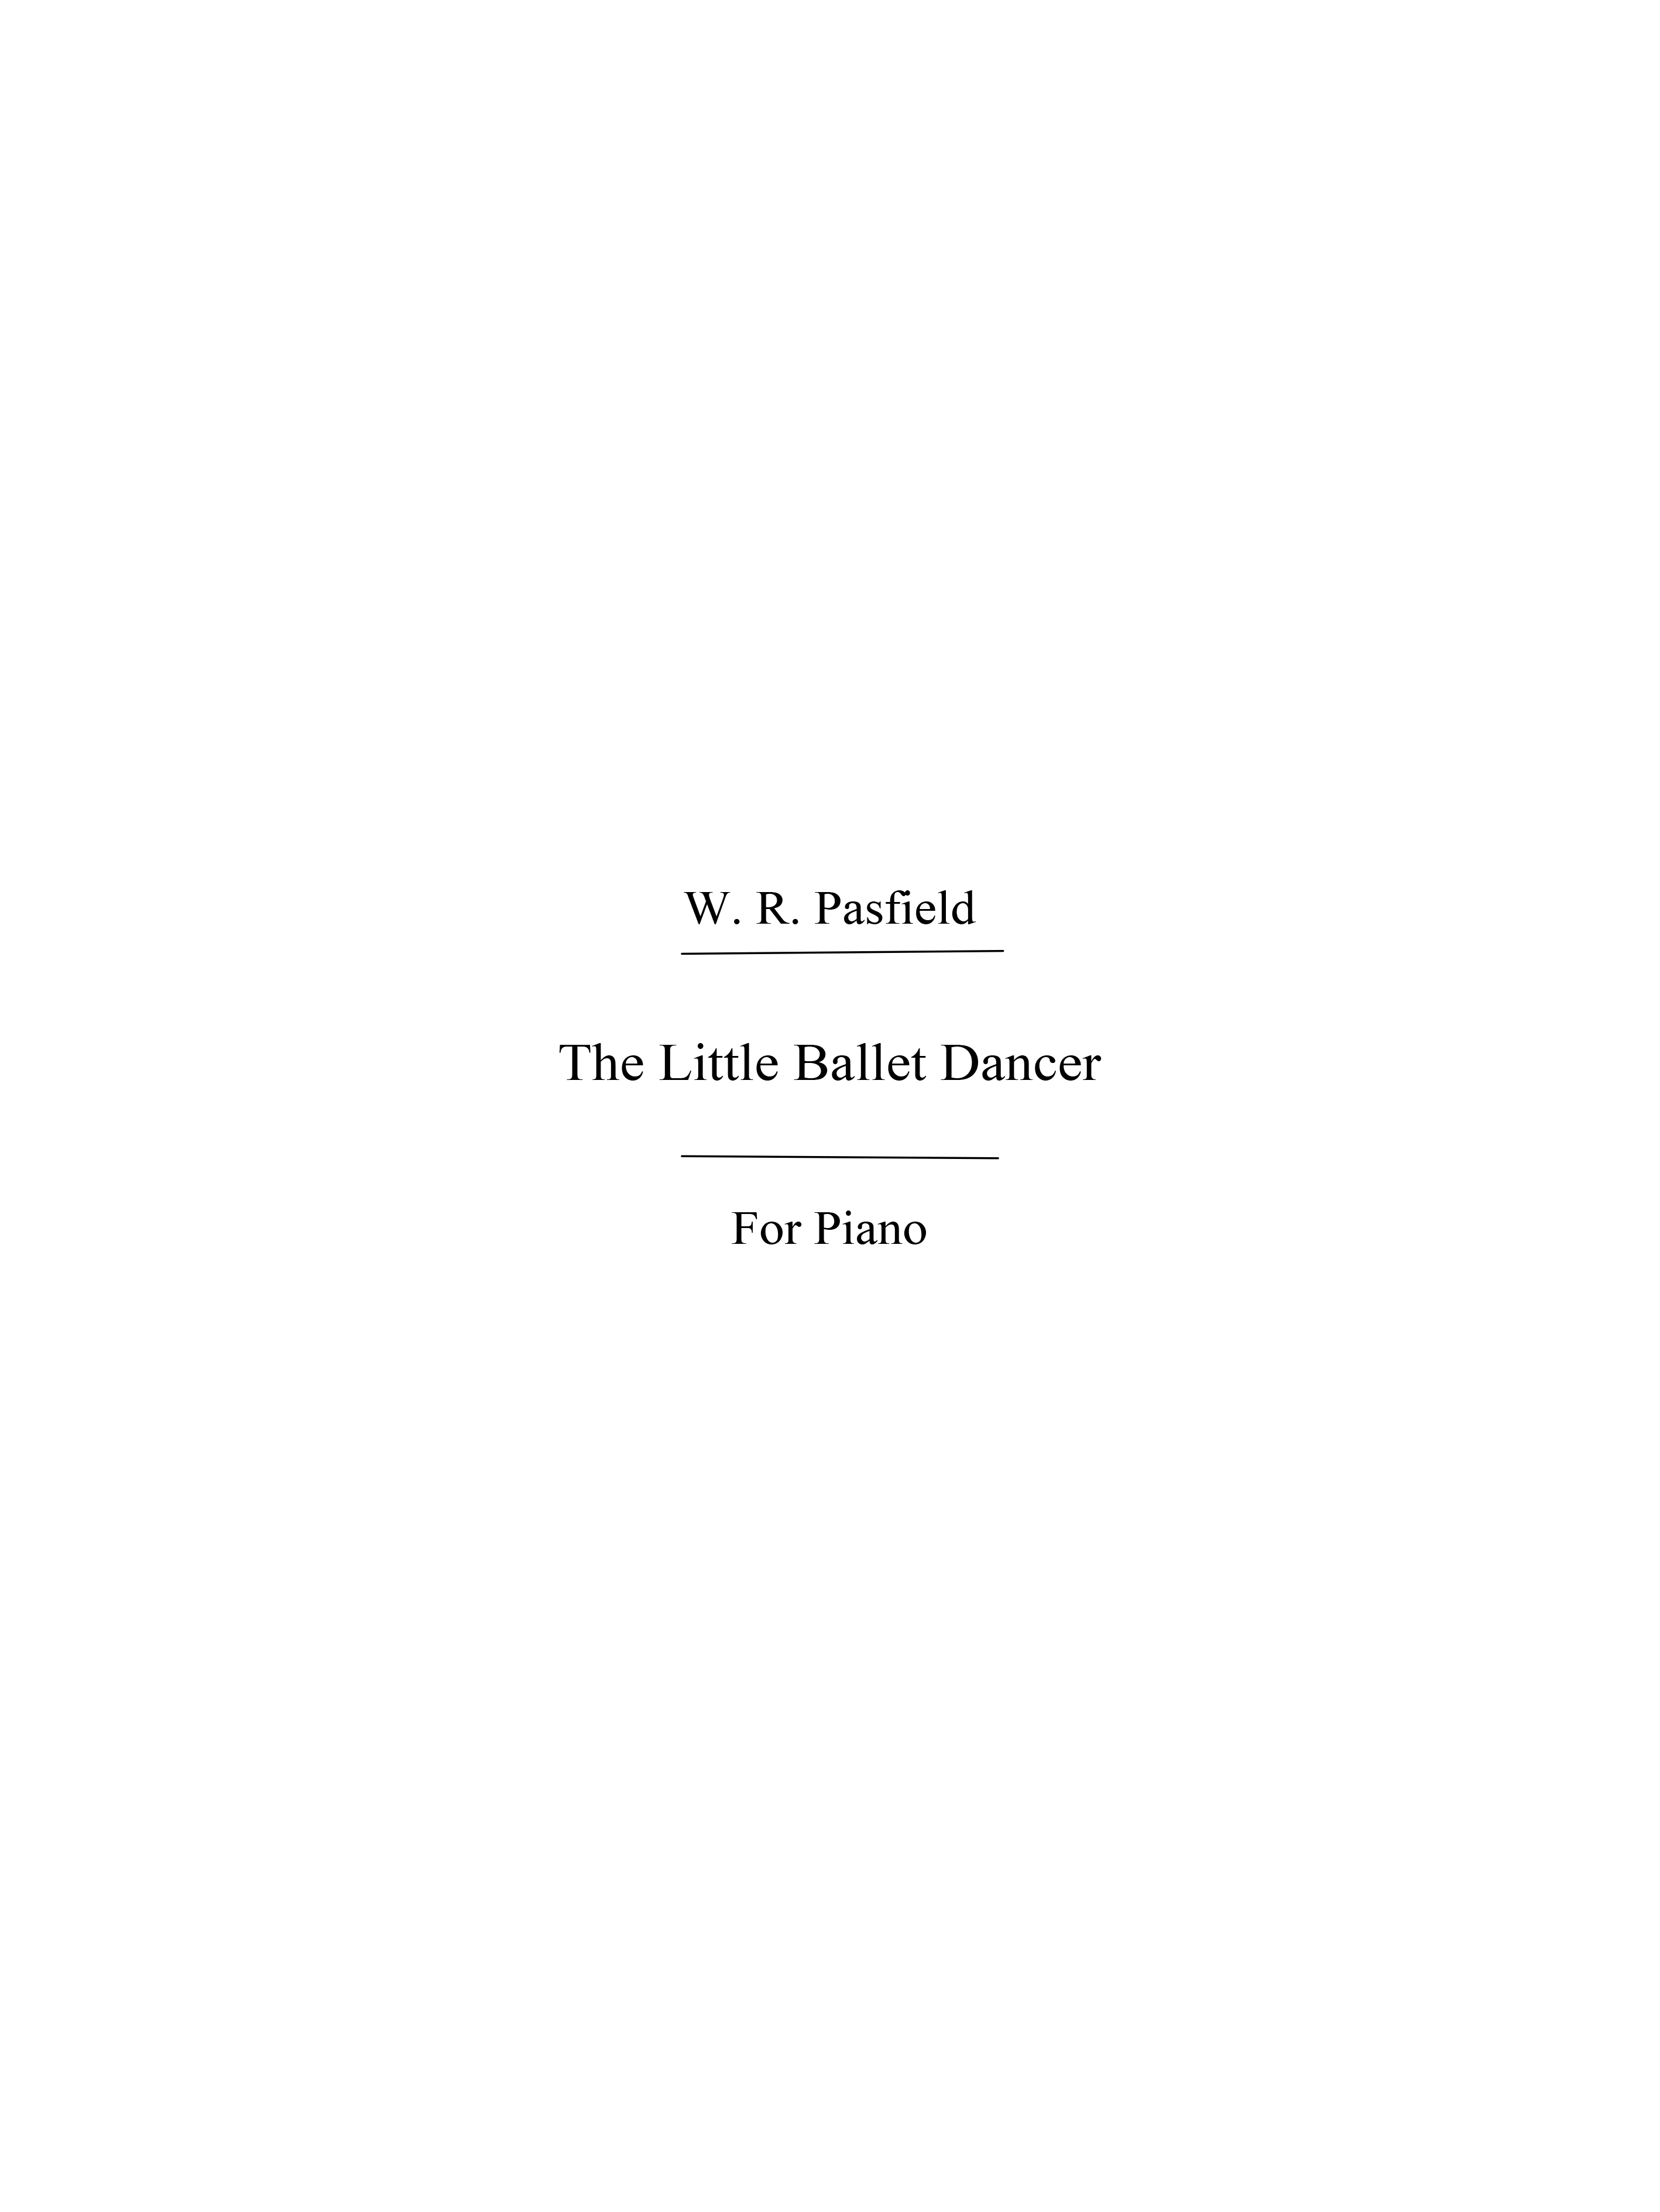 Pasfield, Wr The Little Ballet Dancer Grade Transitional To Lower Pf